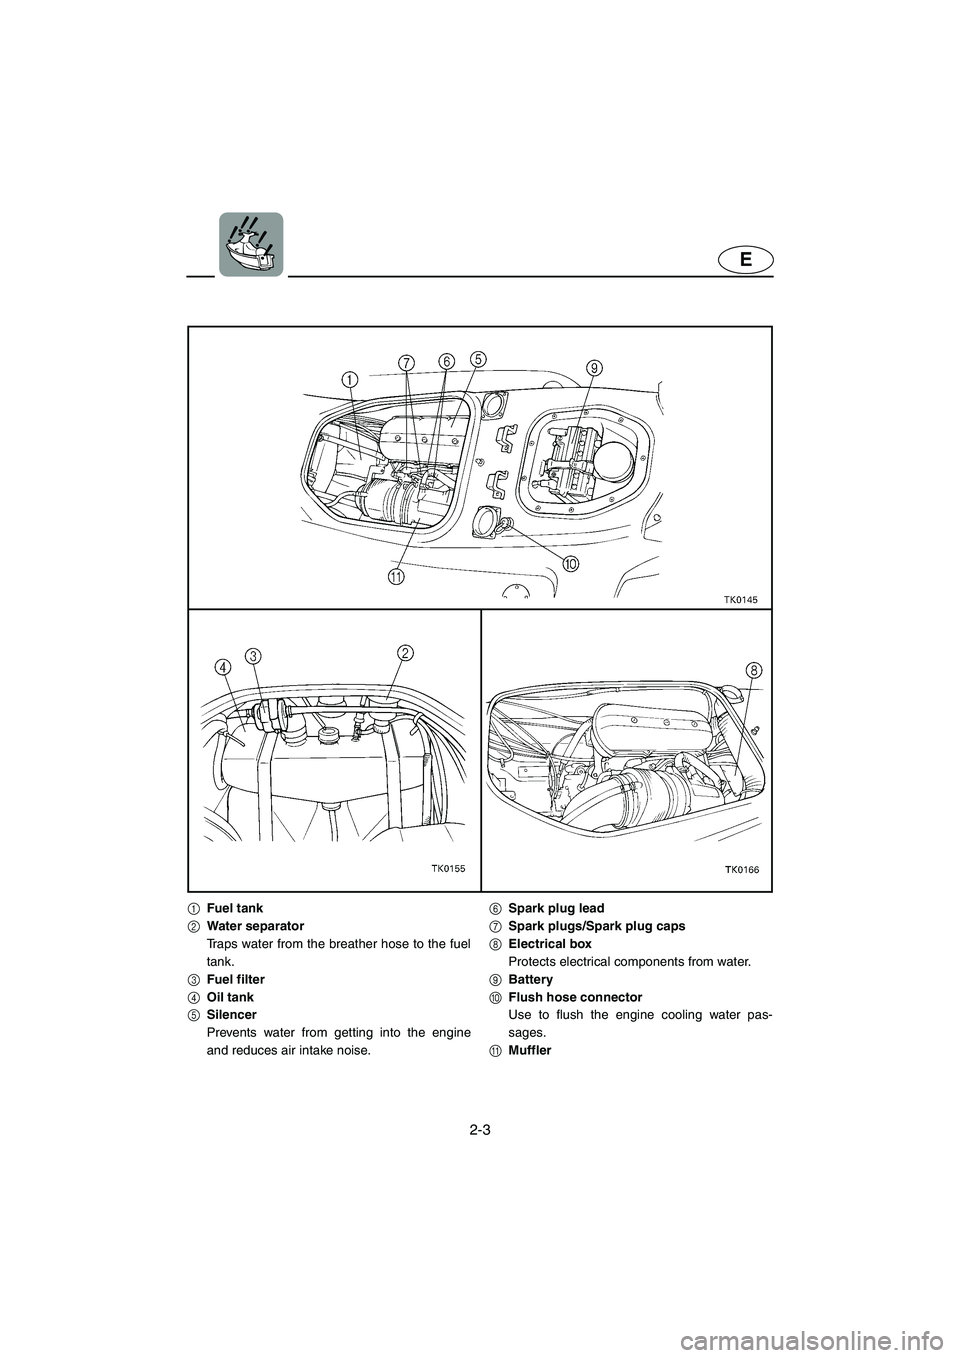 YAMAHA SUV 1200 2003  Owners Manual 2-3
E
1Fuel tank
2Water separator
Traps water from the breather hose to the fuel
tank.
3Fuel filter
4Oil tank
5Silencer
Prevents water from getting into the engine
and reduces air intake noise.6Spark 